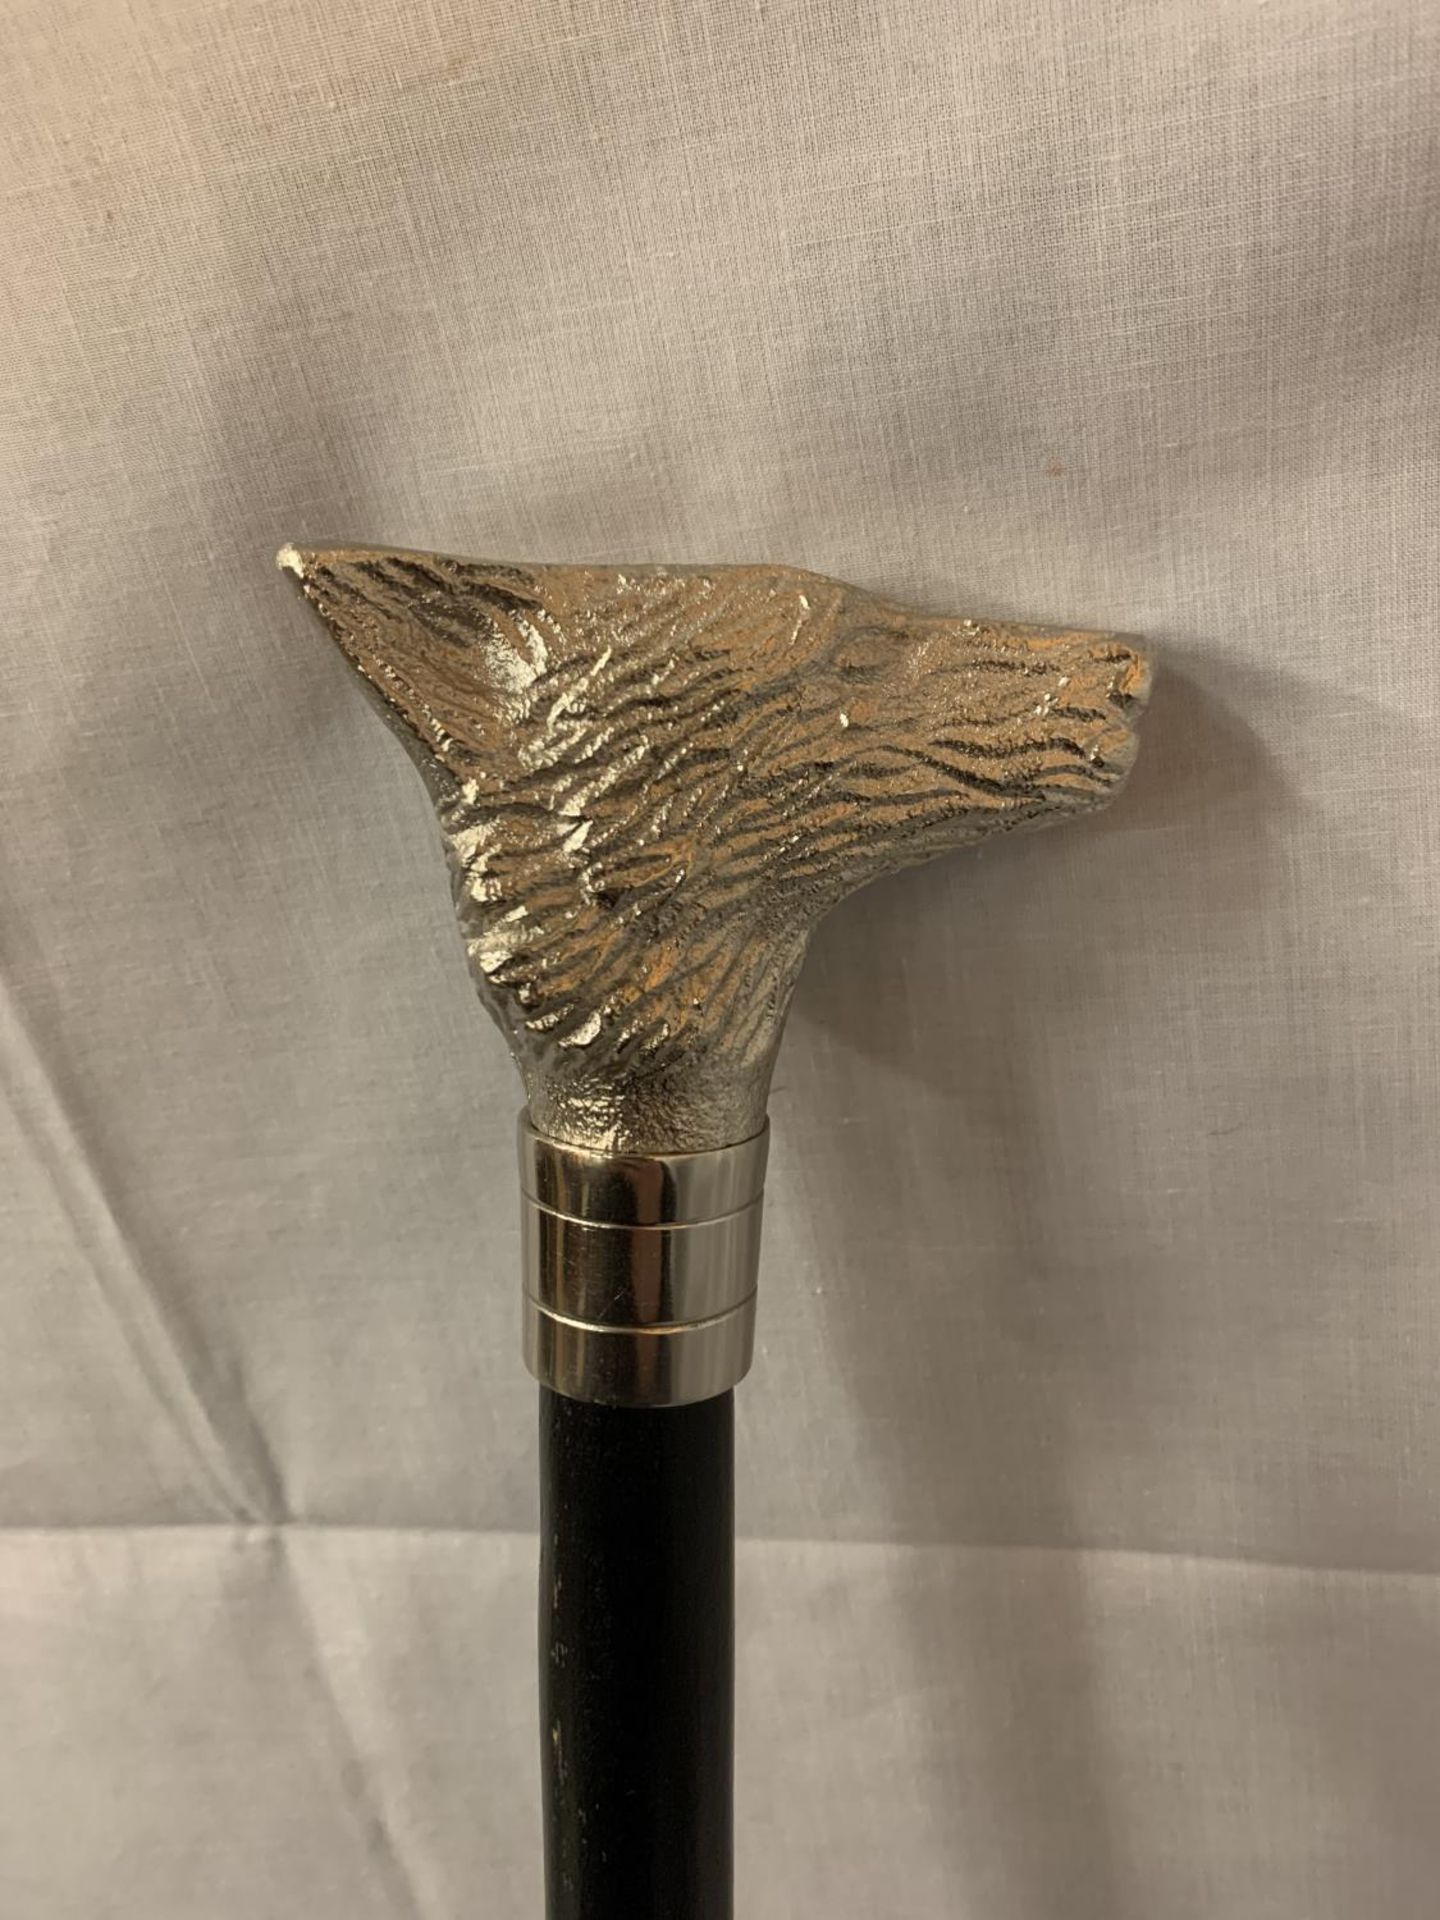 A WOODEN WALKING CANE WITH A SILVER COLOURED FOX HANDLE - Image 3 of 4